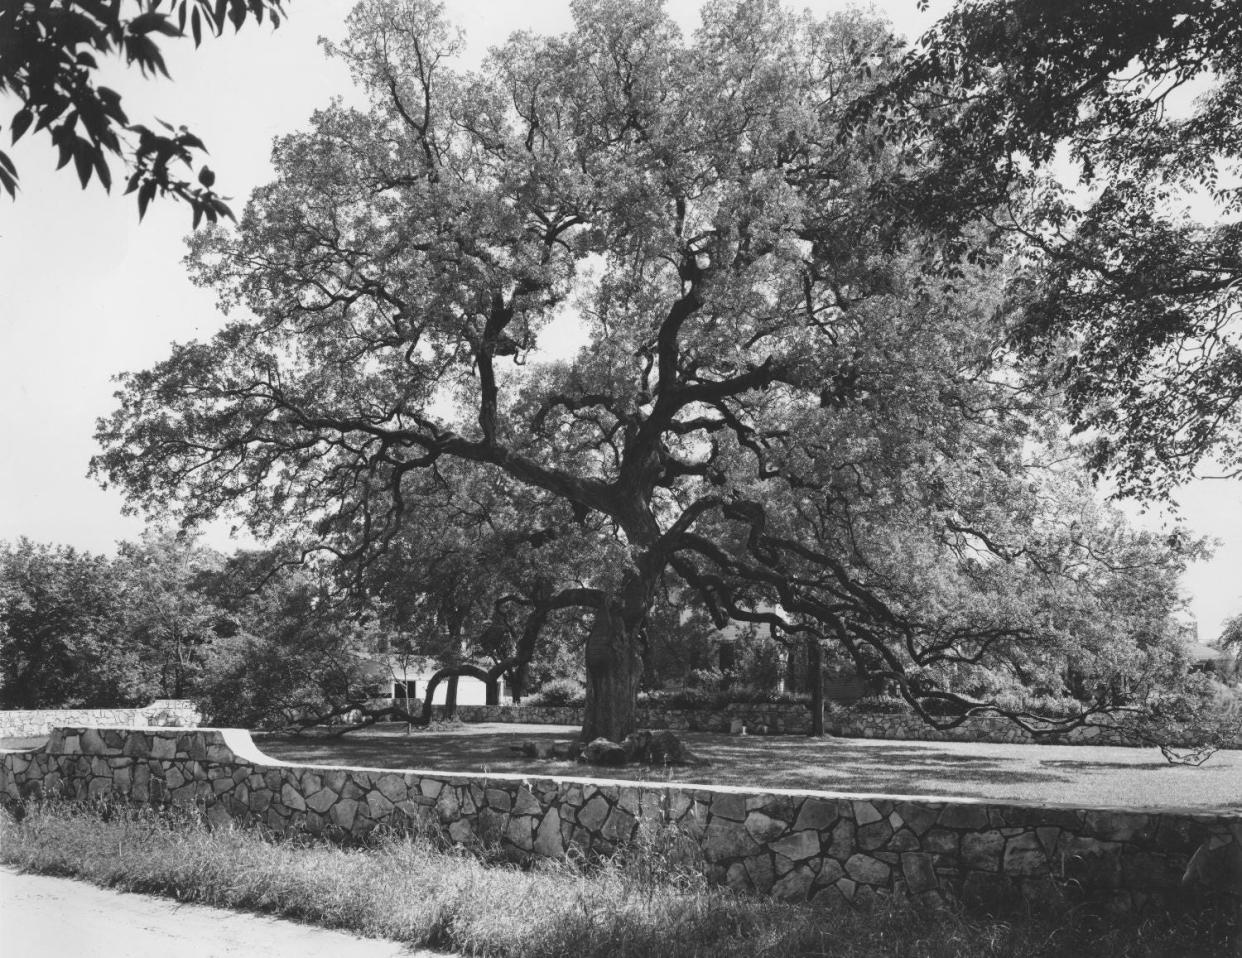 Treaty Oak, as photographed May 1, 1949 by the Bureau of Identification Photographic Lab. Forty years later in 1989, it was poisoned almost to death. What survived after heroic intervention is a pale shadow of its old majesty.